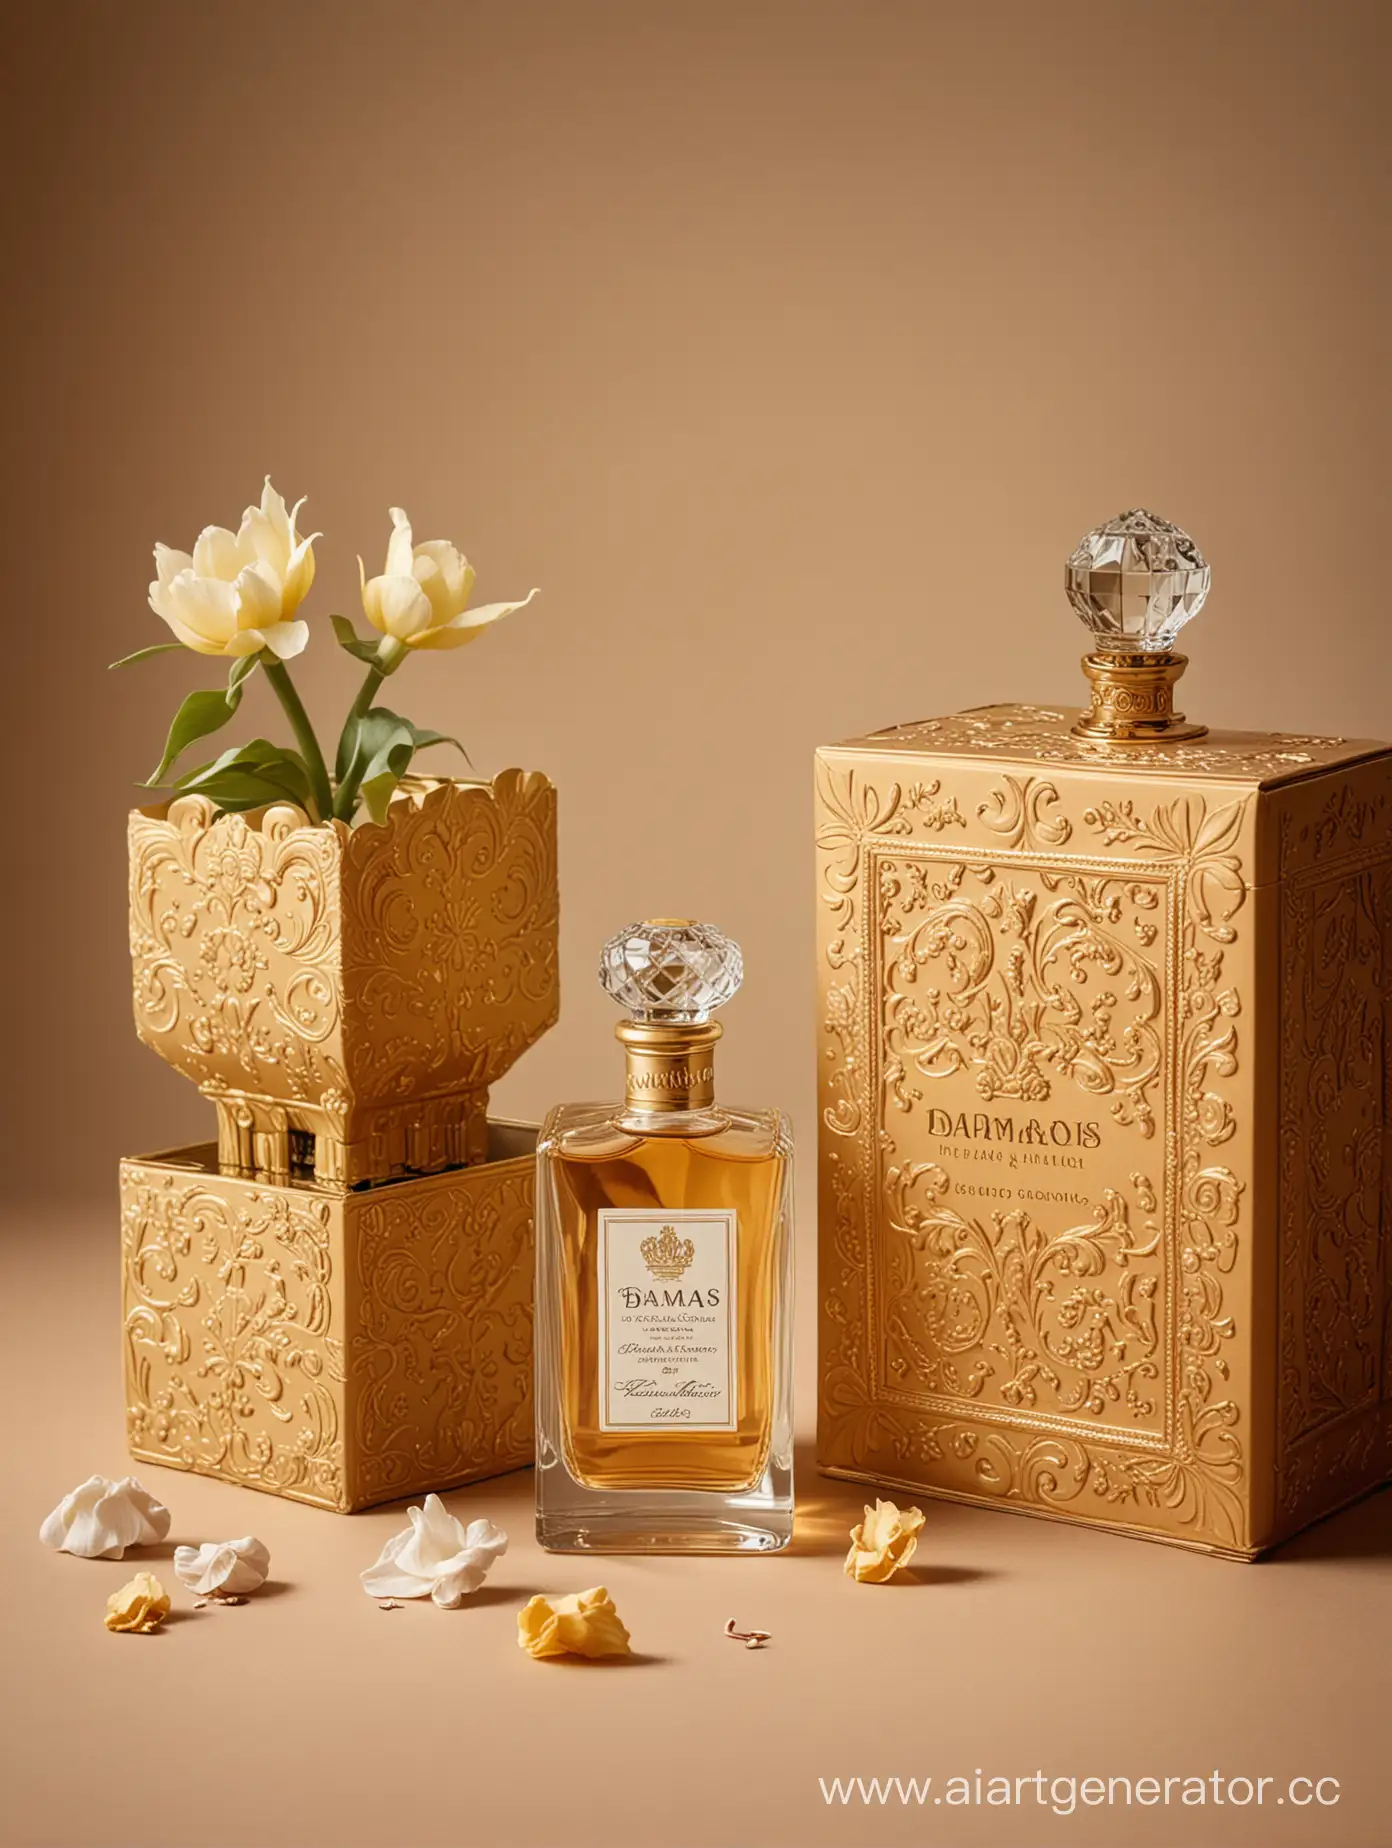 Flemish-Baroque-Still-Life-Damas-Cologne-and-Box-on-Golden-Background